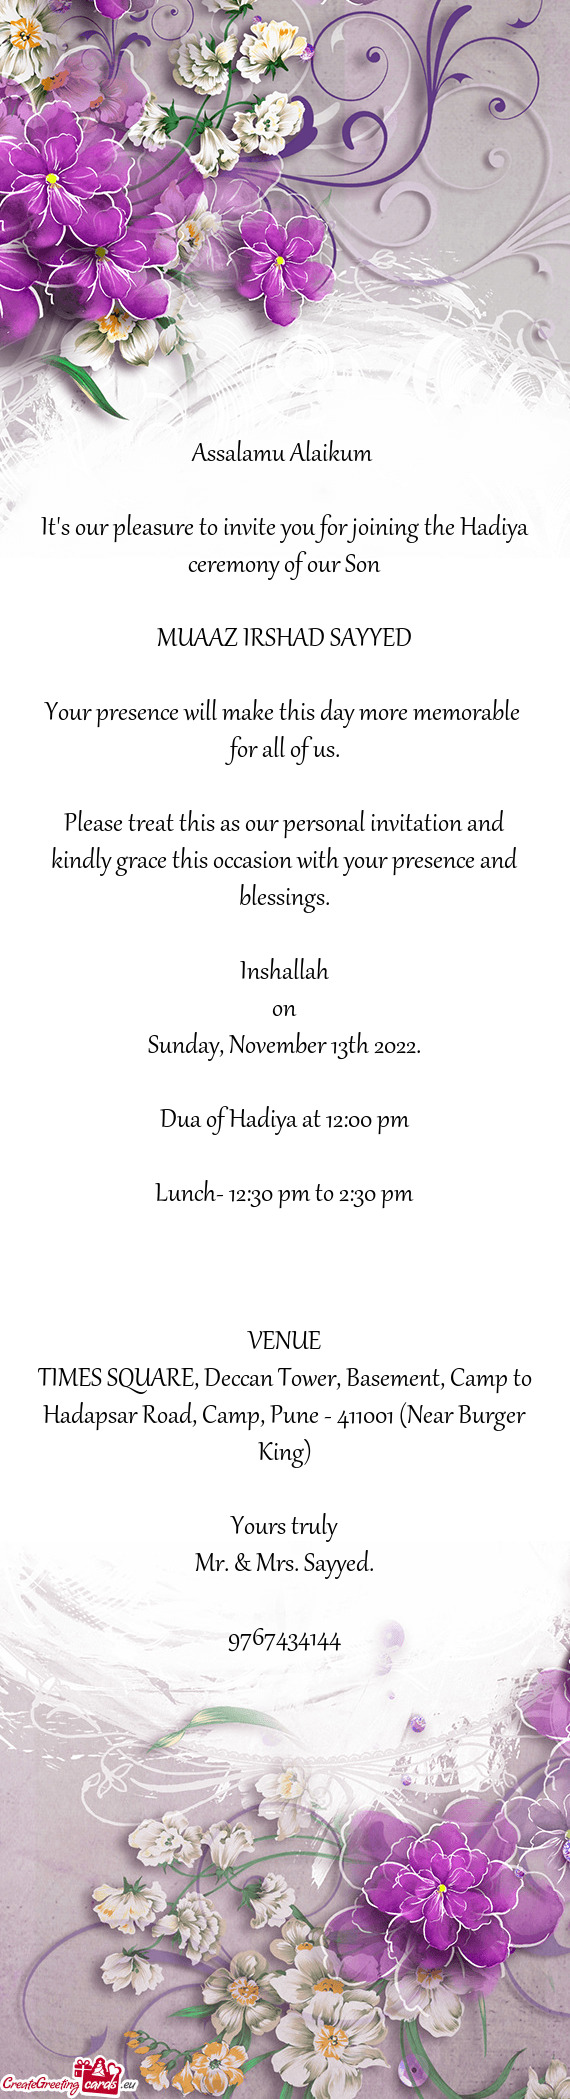 It's our pleasure to invite you for joining the Hadiya ceremony of our Son